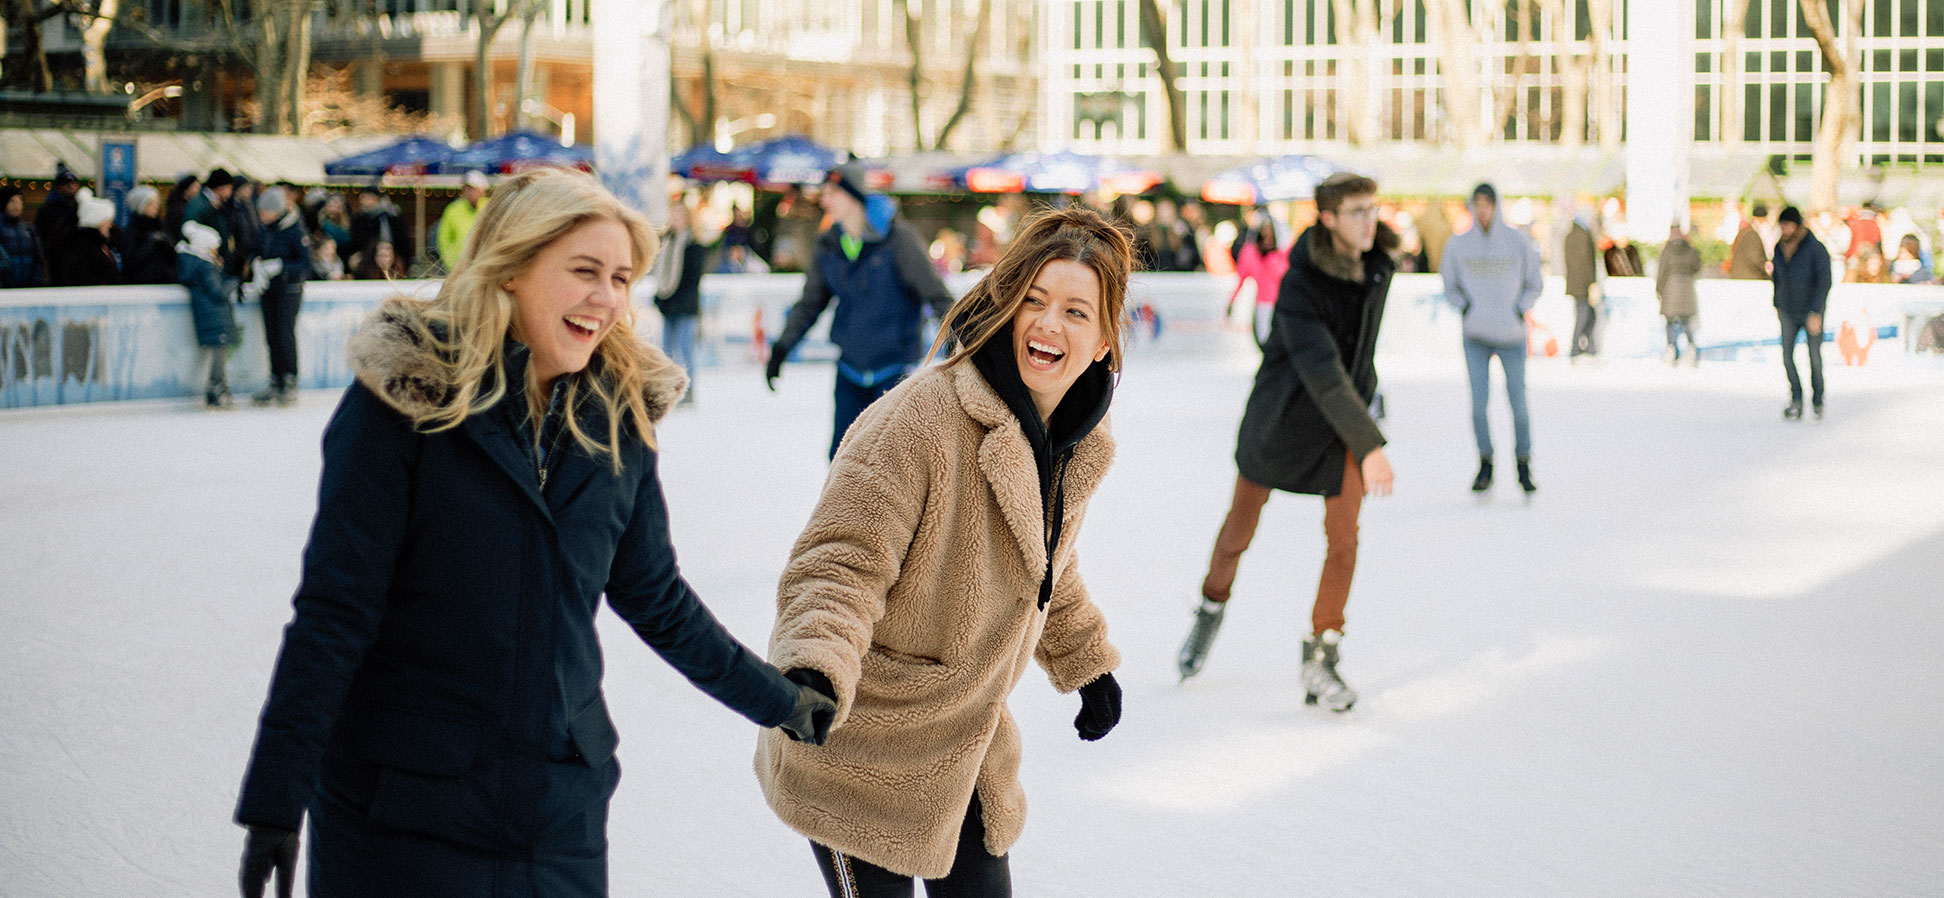 two young women ice skating at the rink at rockefeller center in new york city